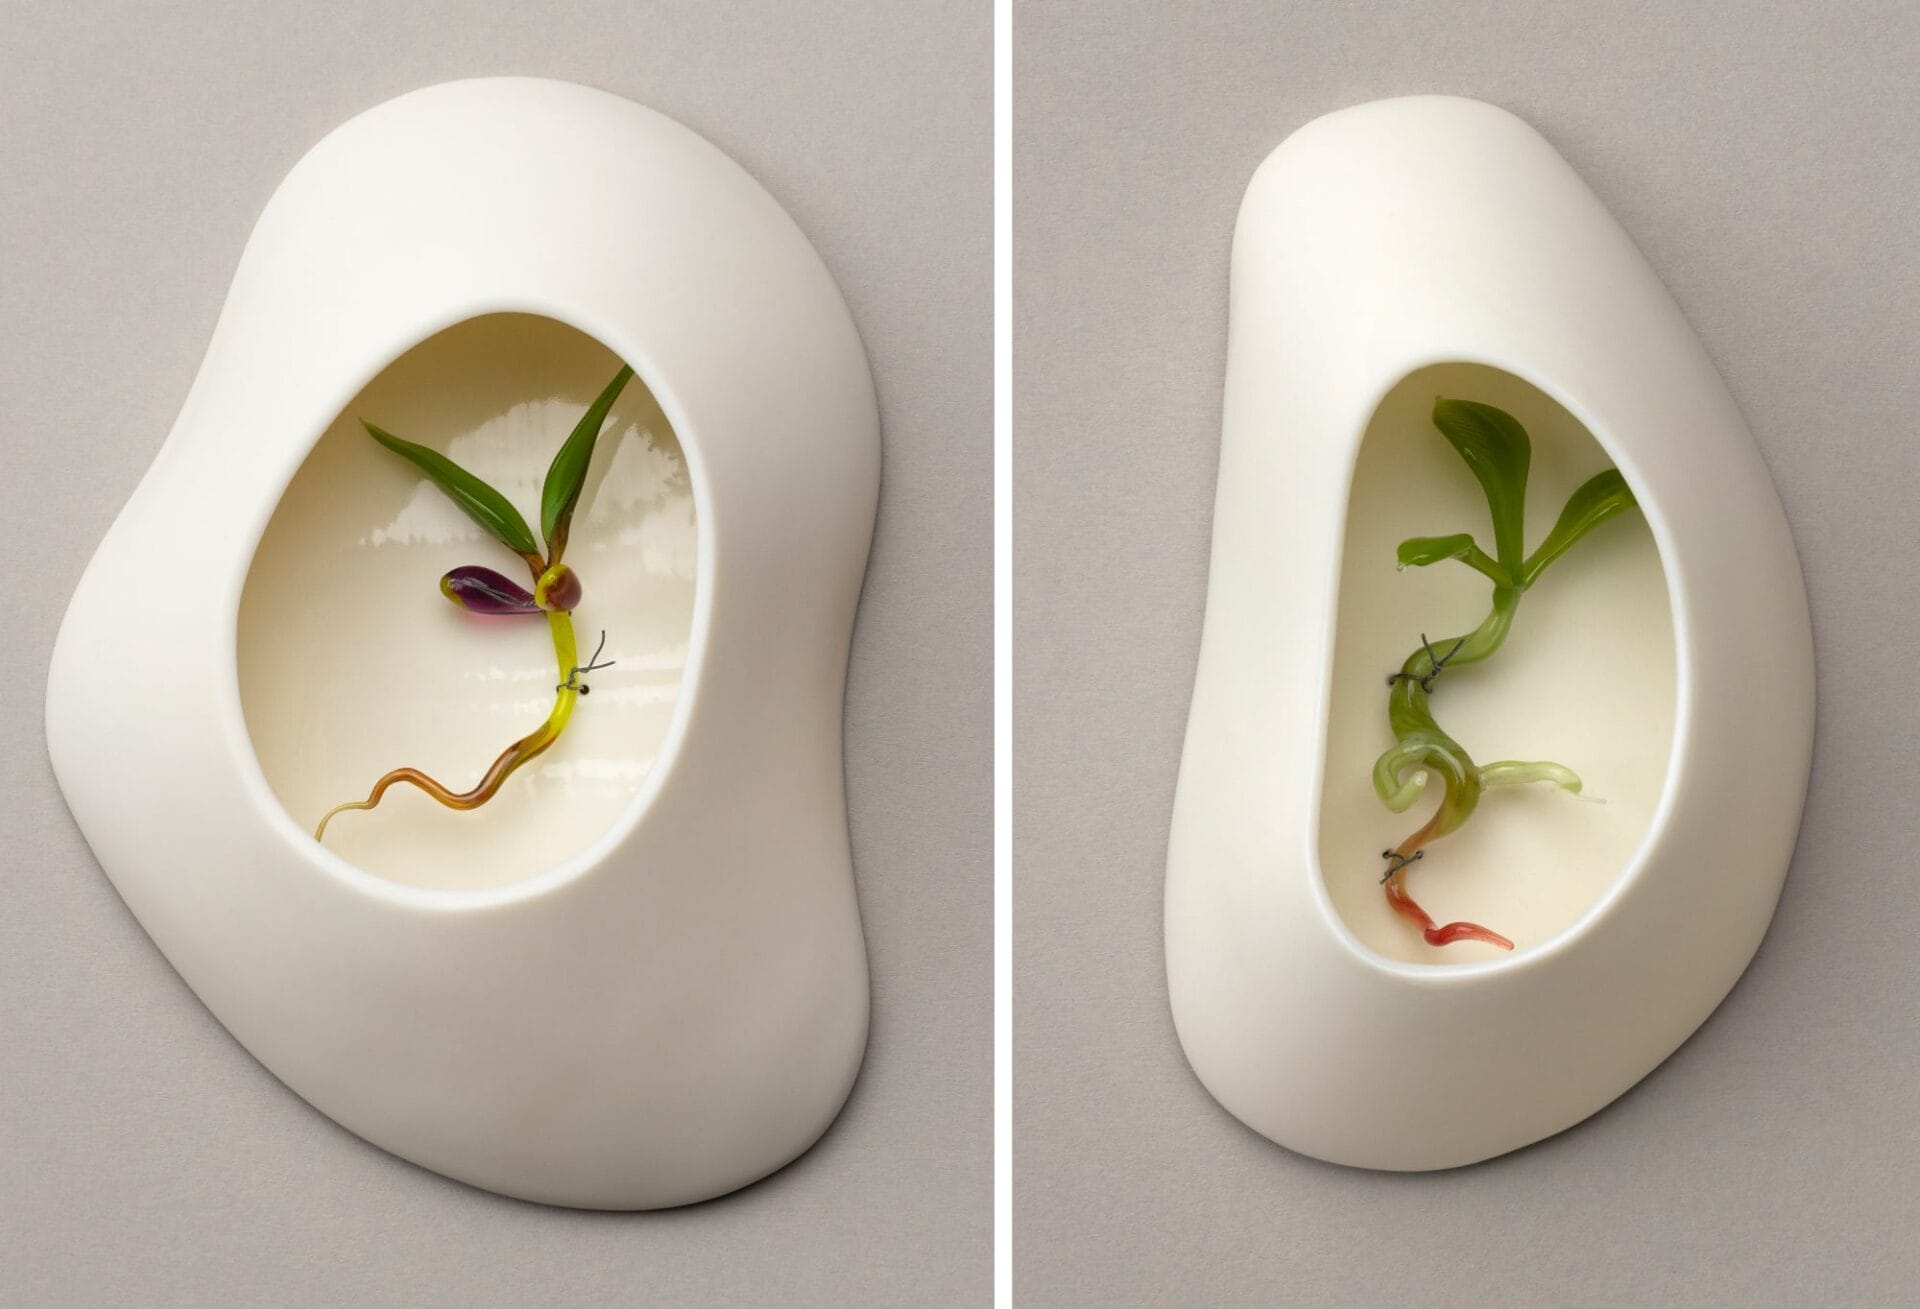 two images, both of small glass seedlings inside white porcelain nests